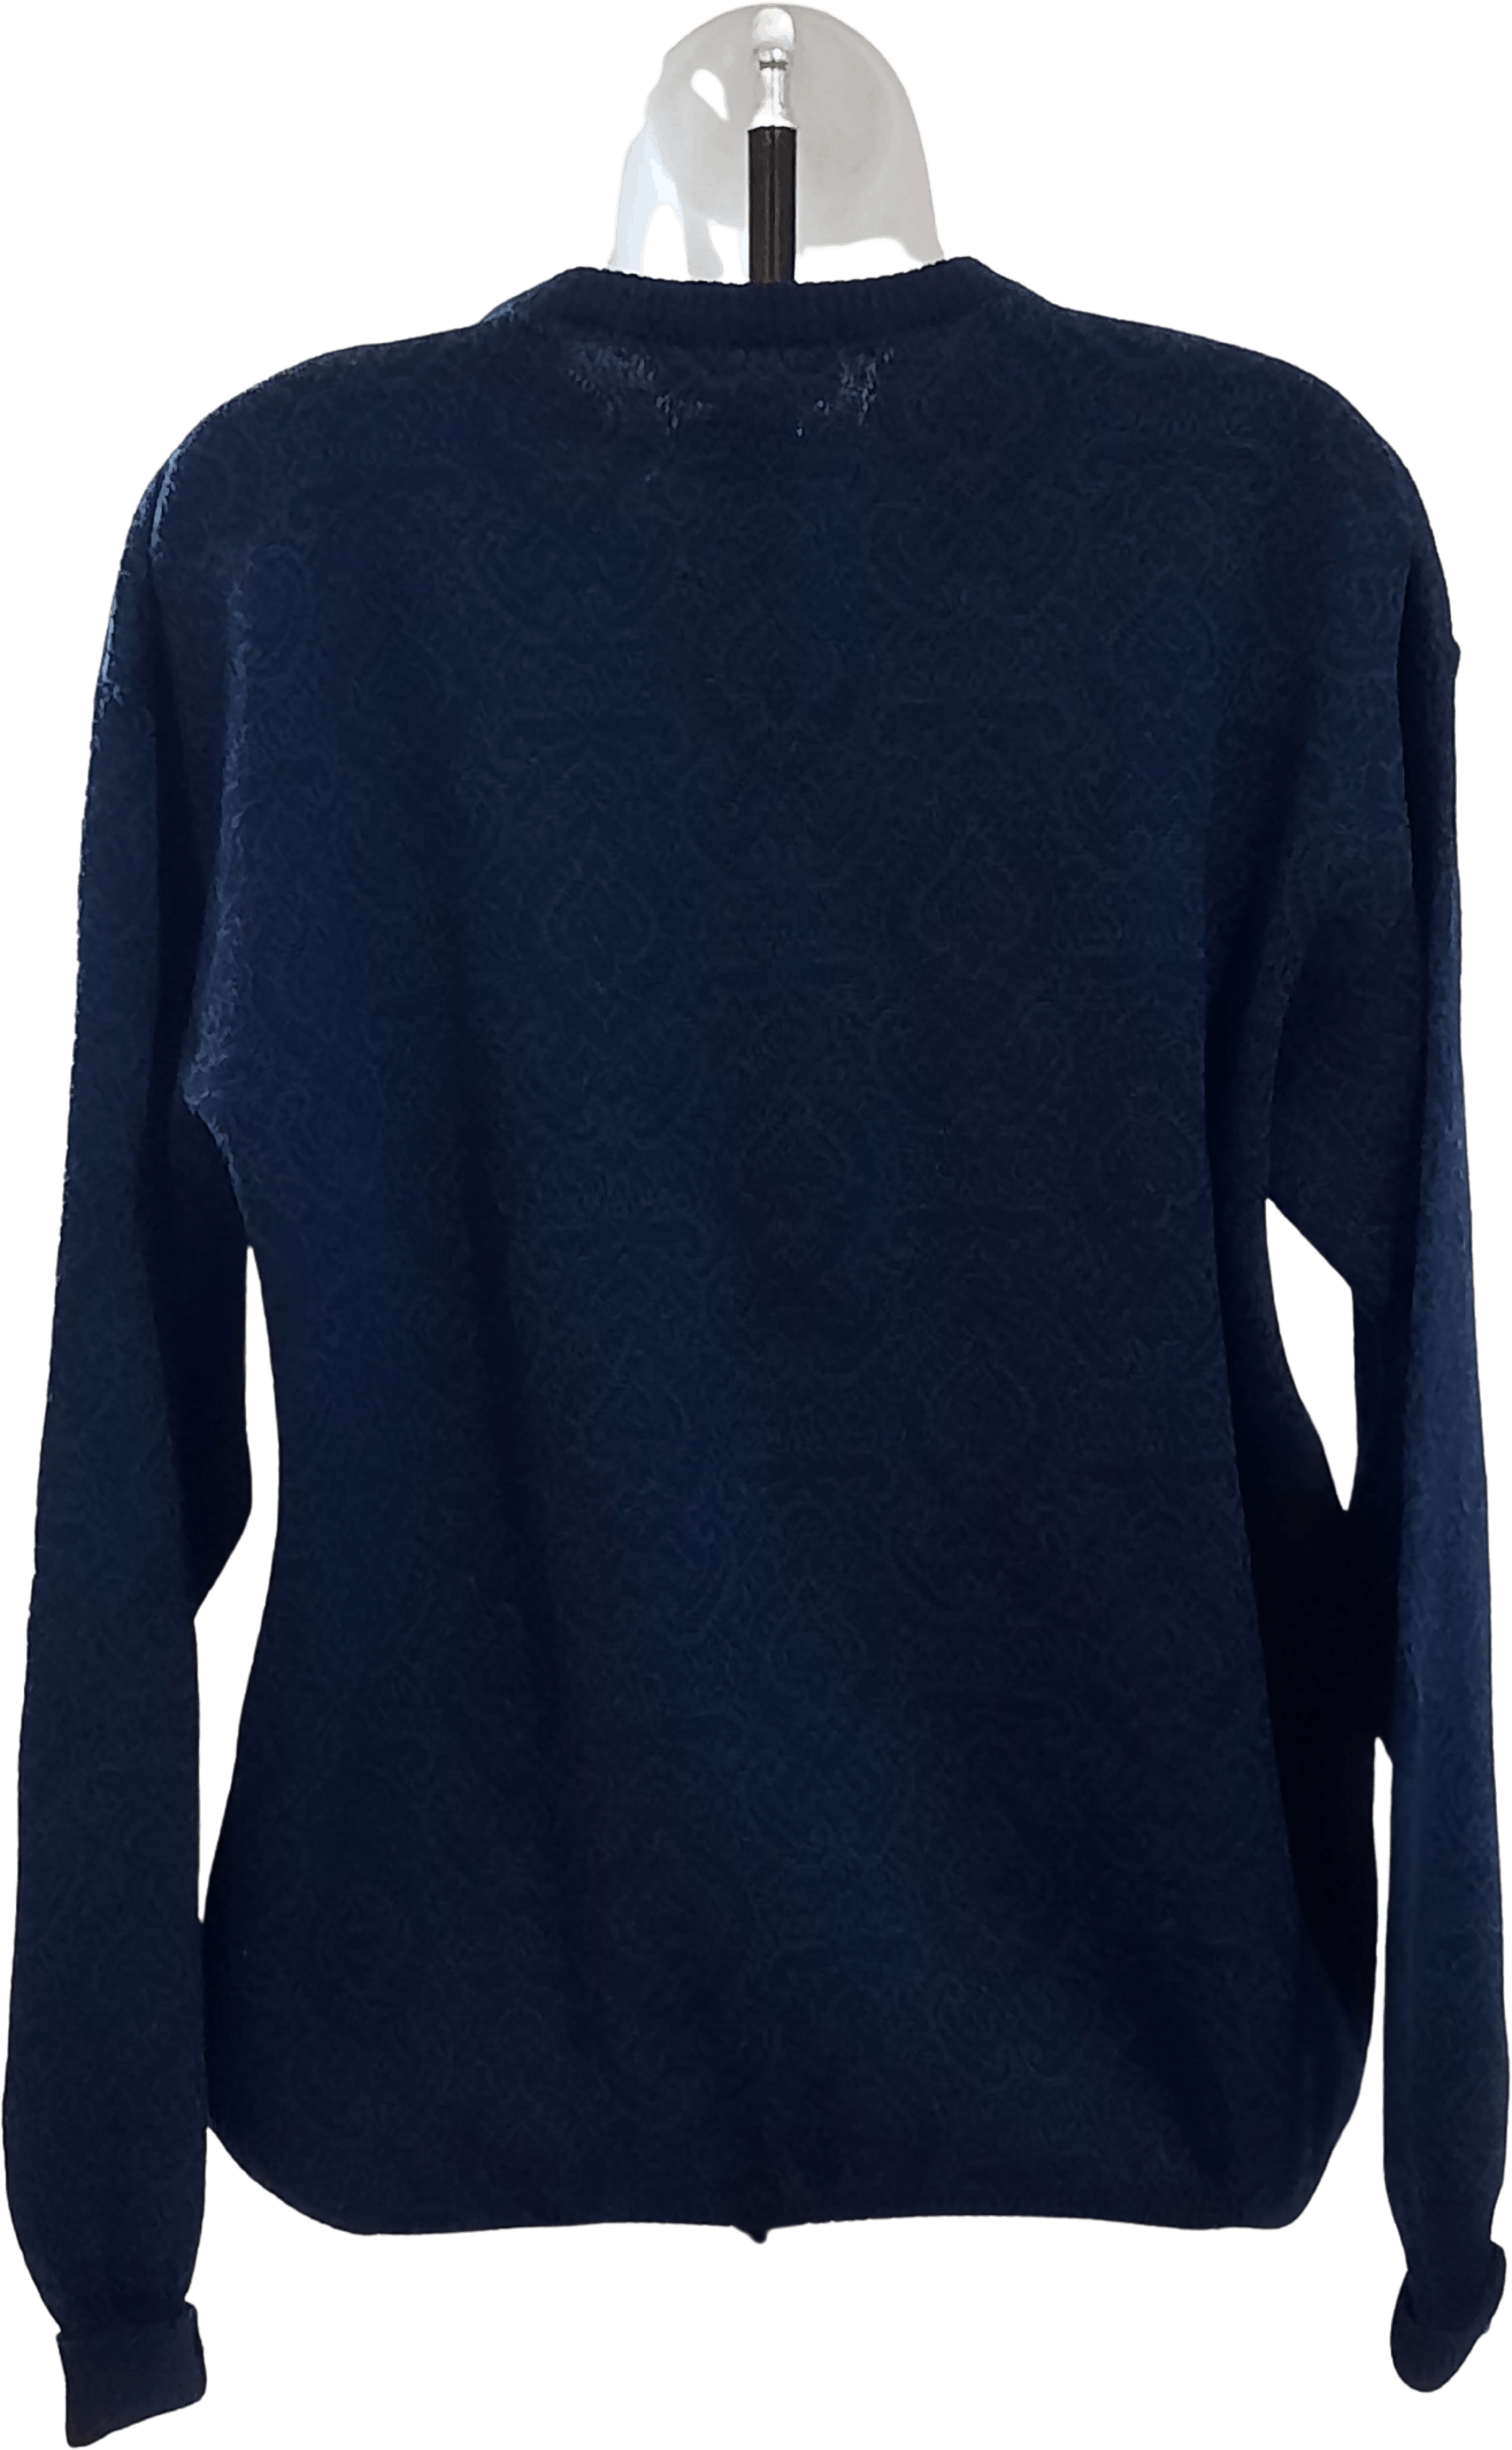 Vintage Navy Blue Wool Sweater by Tricots St. Raphael | Shop THRILLING